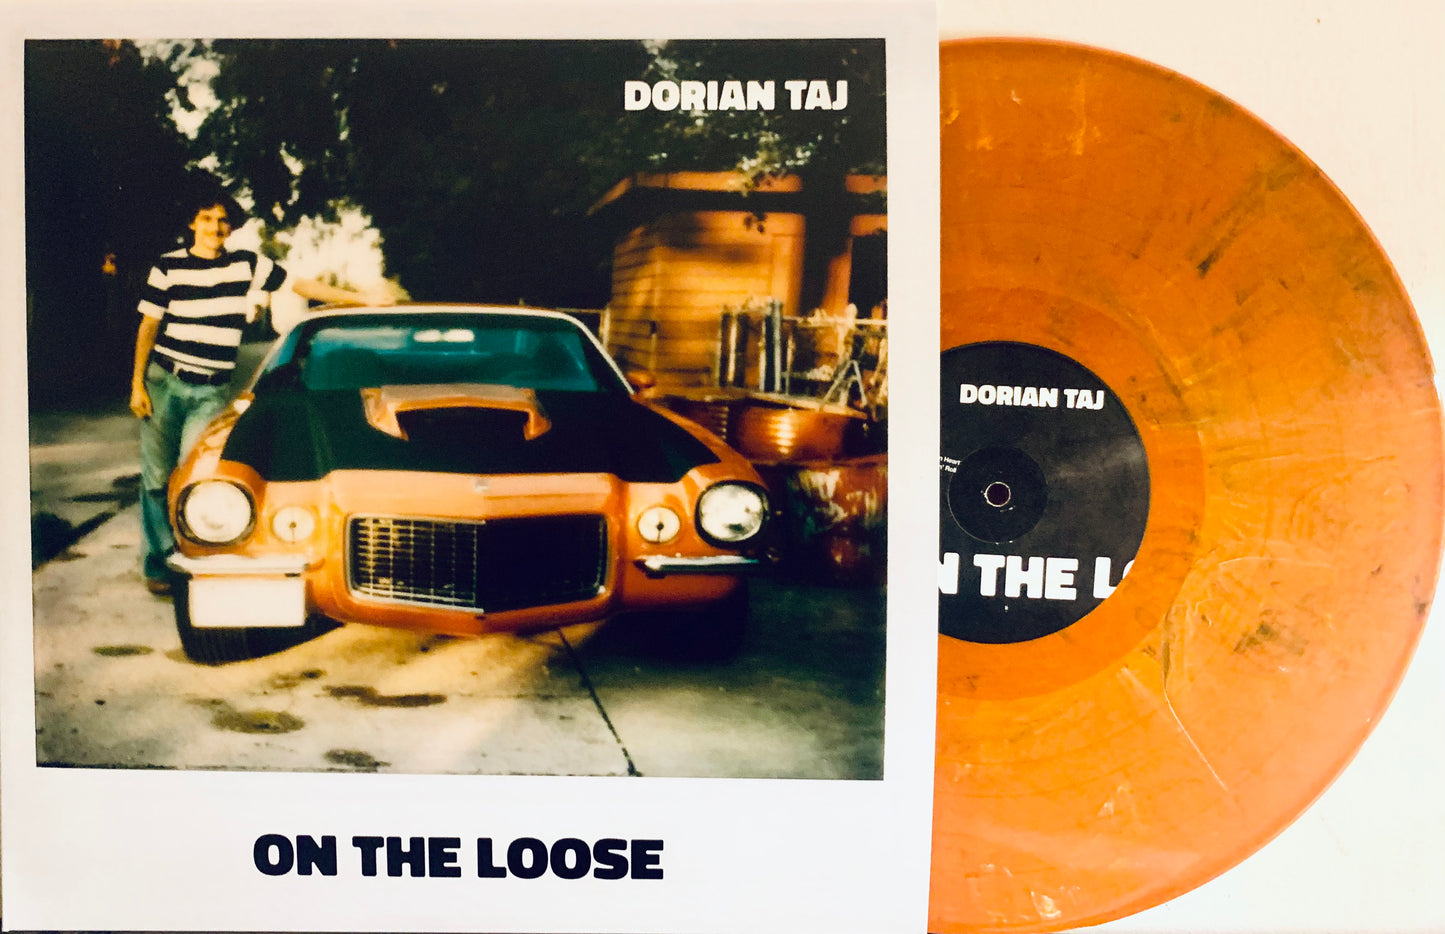 12" colored vinyl record of On the Loose